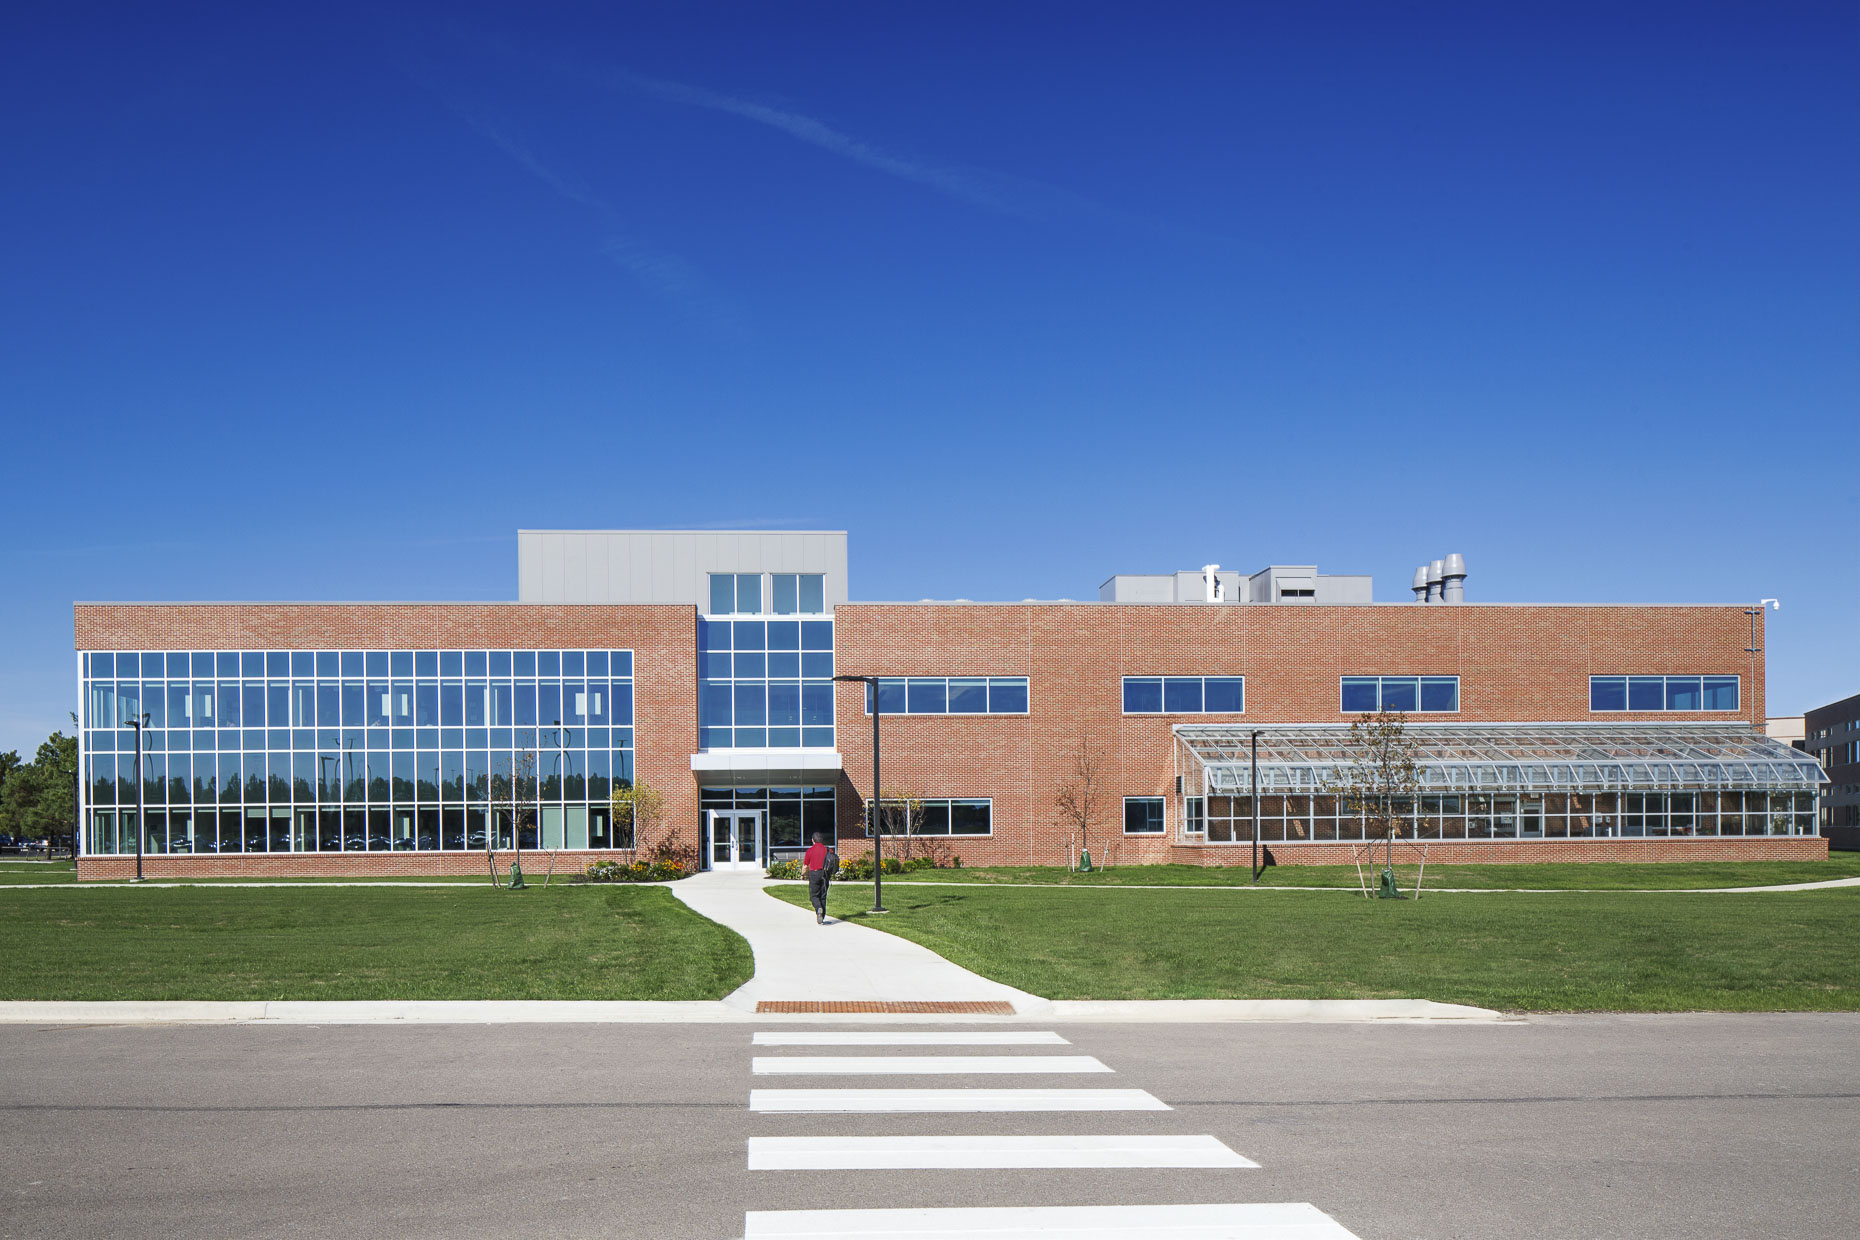 OSU Marion Science & Engineering Building by Stantec photographed by Lauren K Davis based in Columbus, Ohio